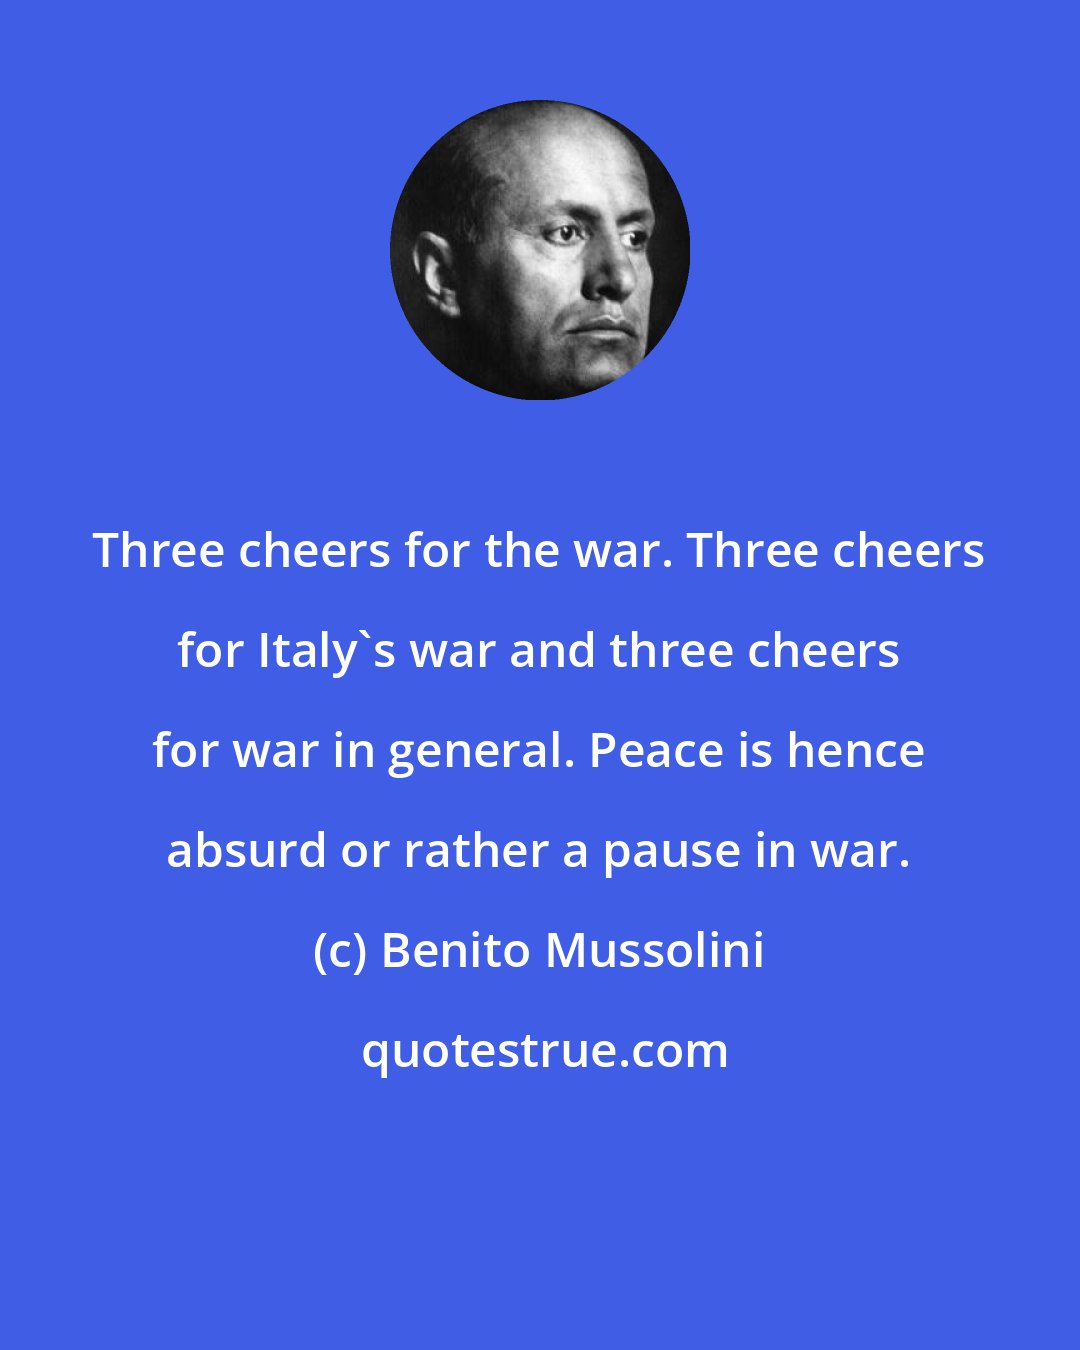 Benito Mussolini: Three cheers for the war. Three cheers for Italy's war and three cheers for war in general. Peace is hence absurd or rather a pause in war.